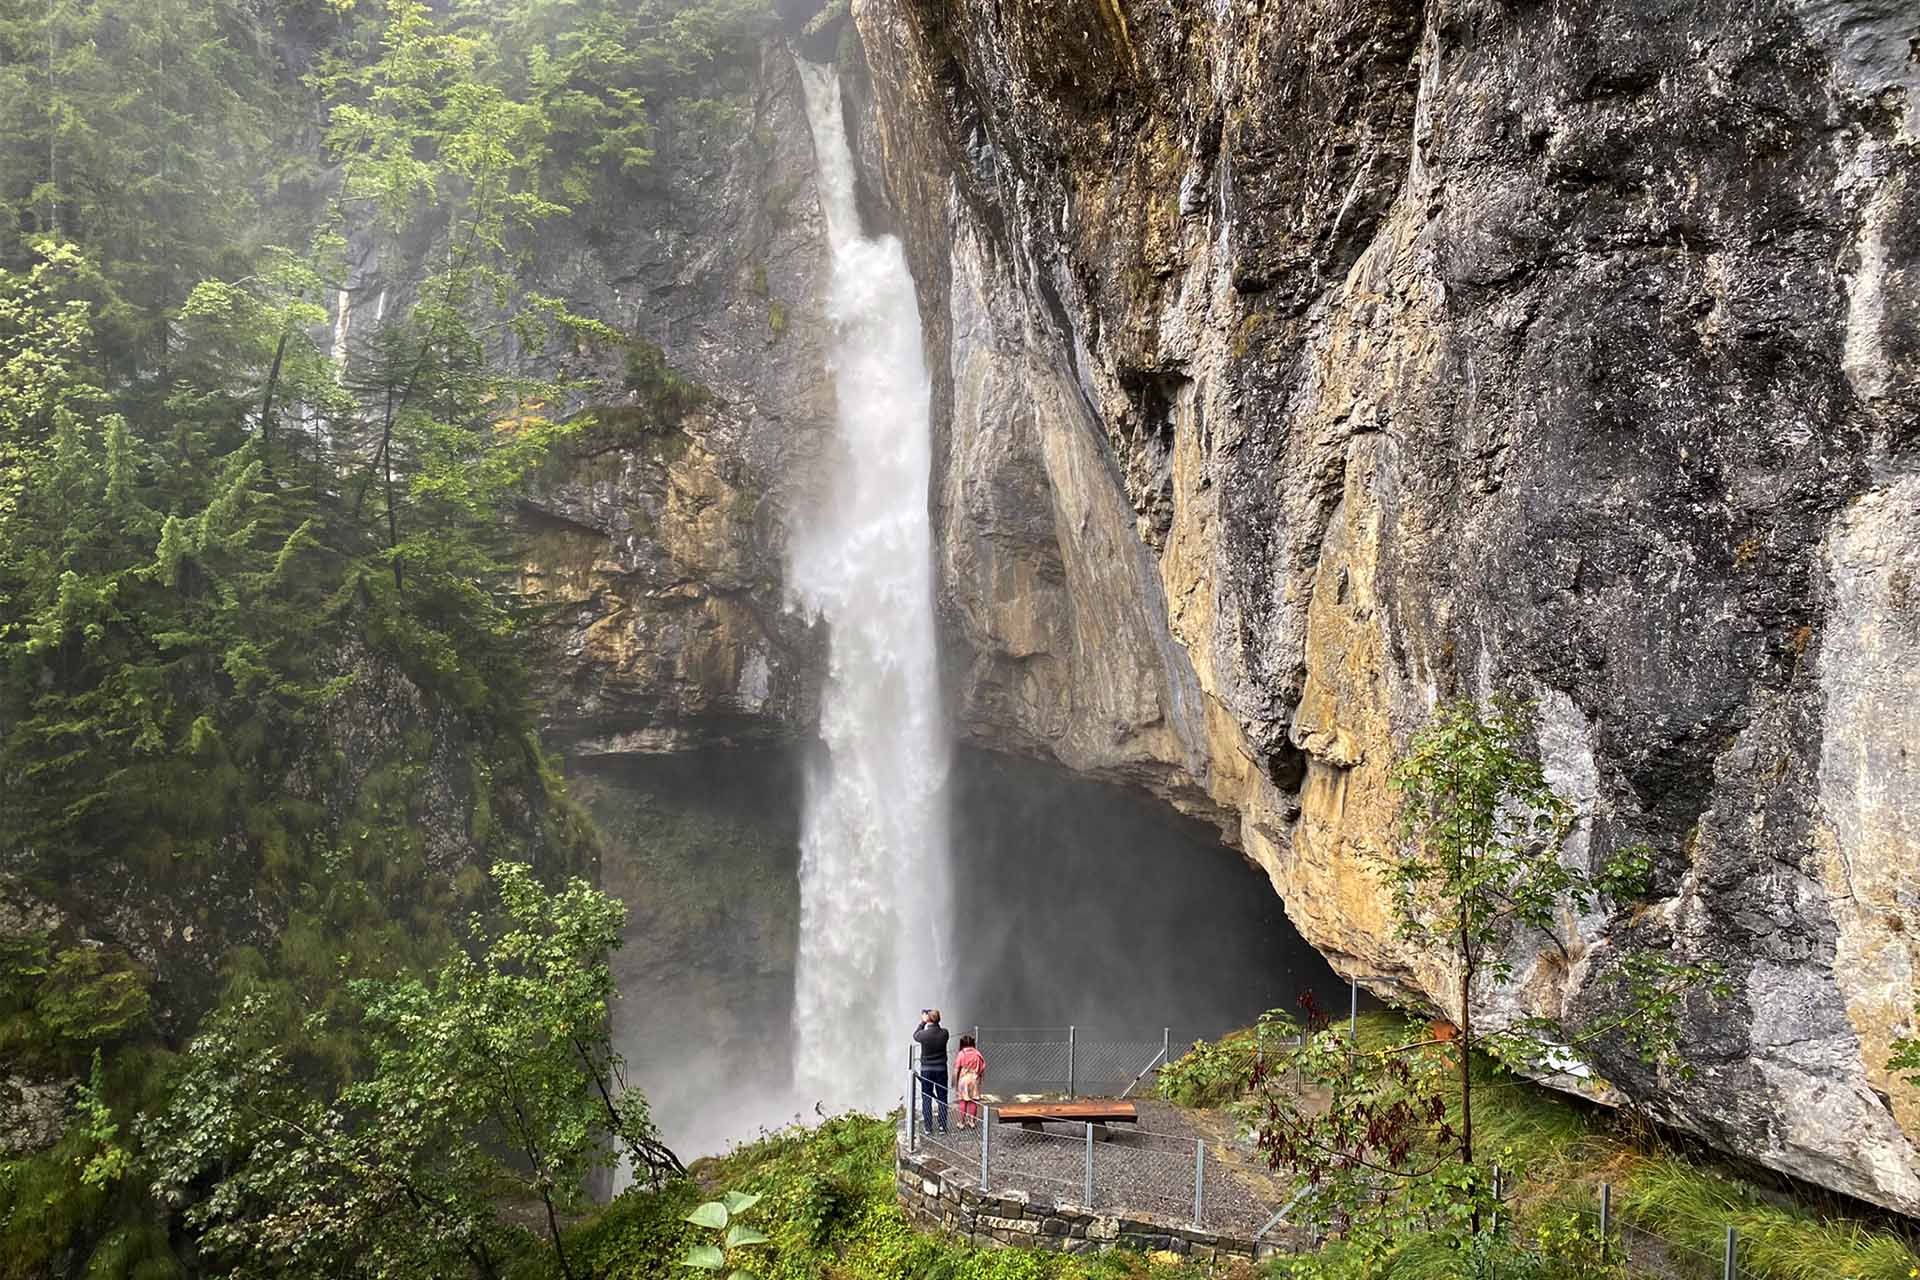 The powerful Berglistüber Waterfall is one of the most beautiful waterfalls in Switzerland.